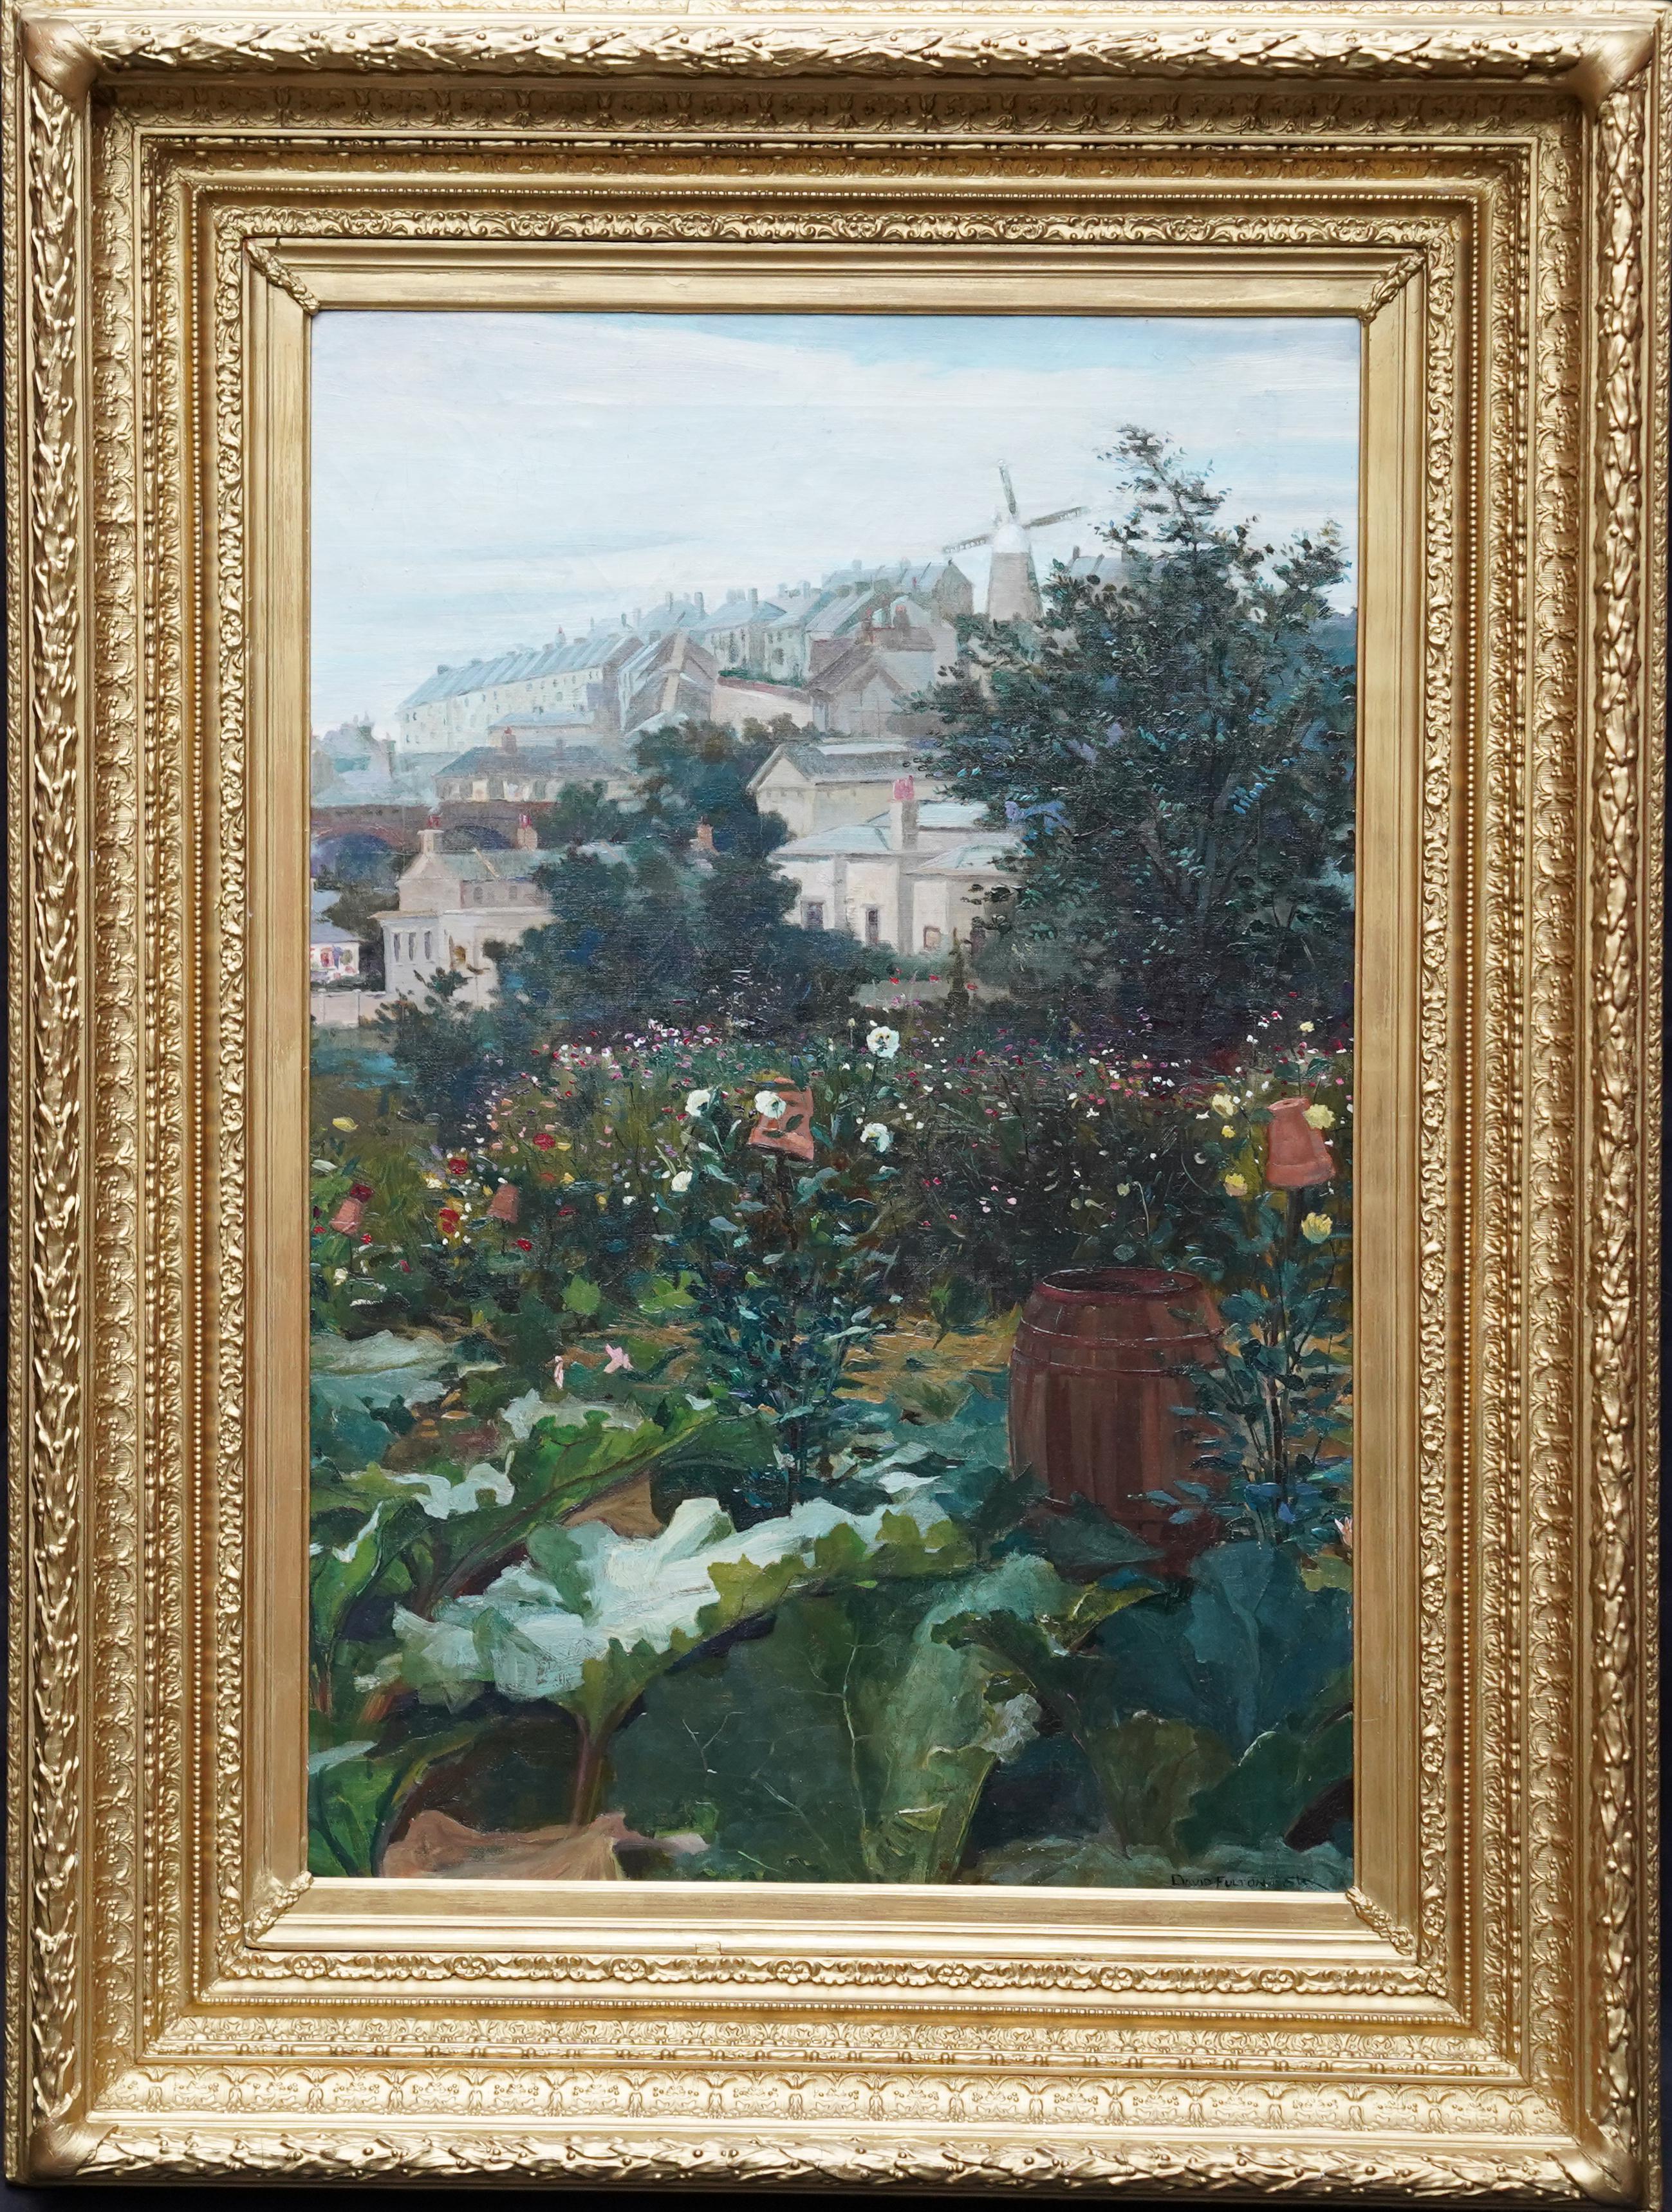 City Garden with Windmill Beyond - Scottish 19th century landscape oil painting For Sale 9